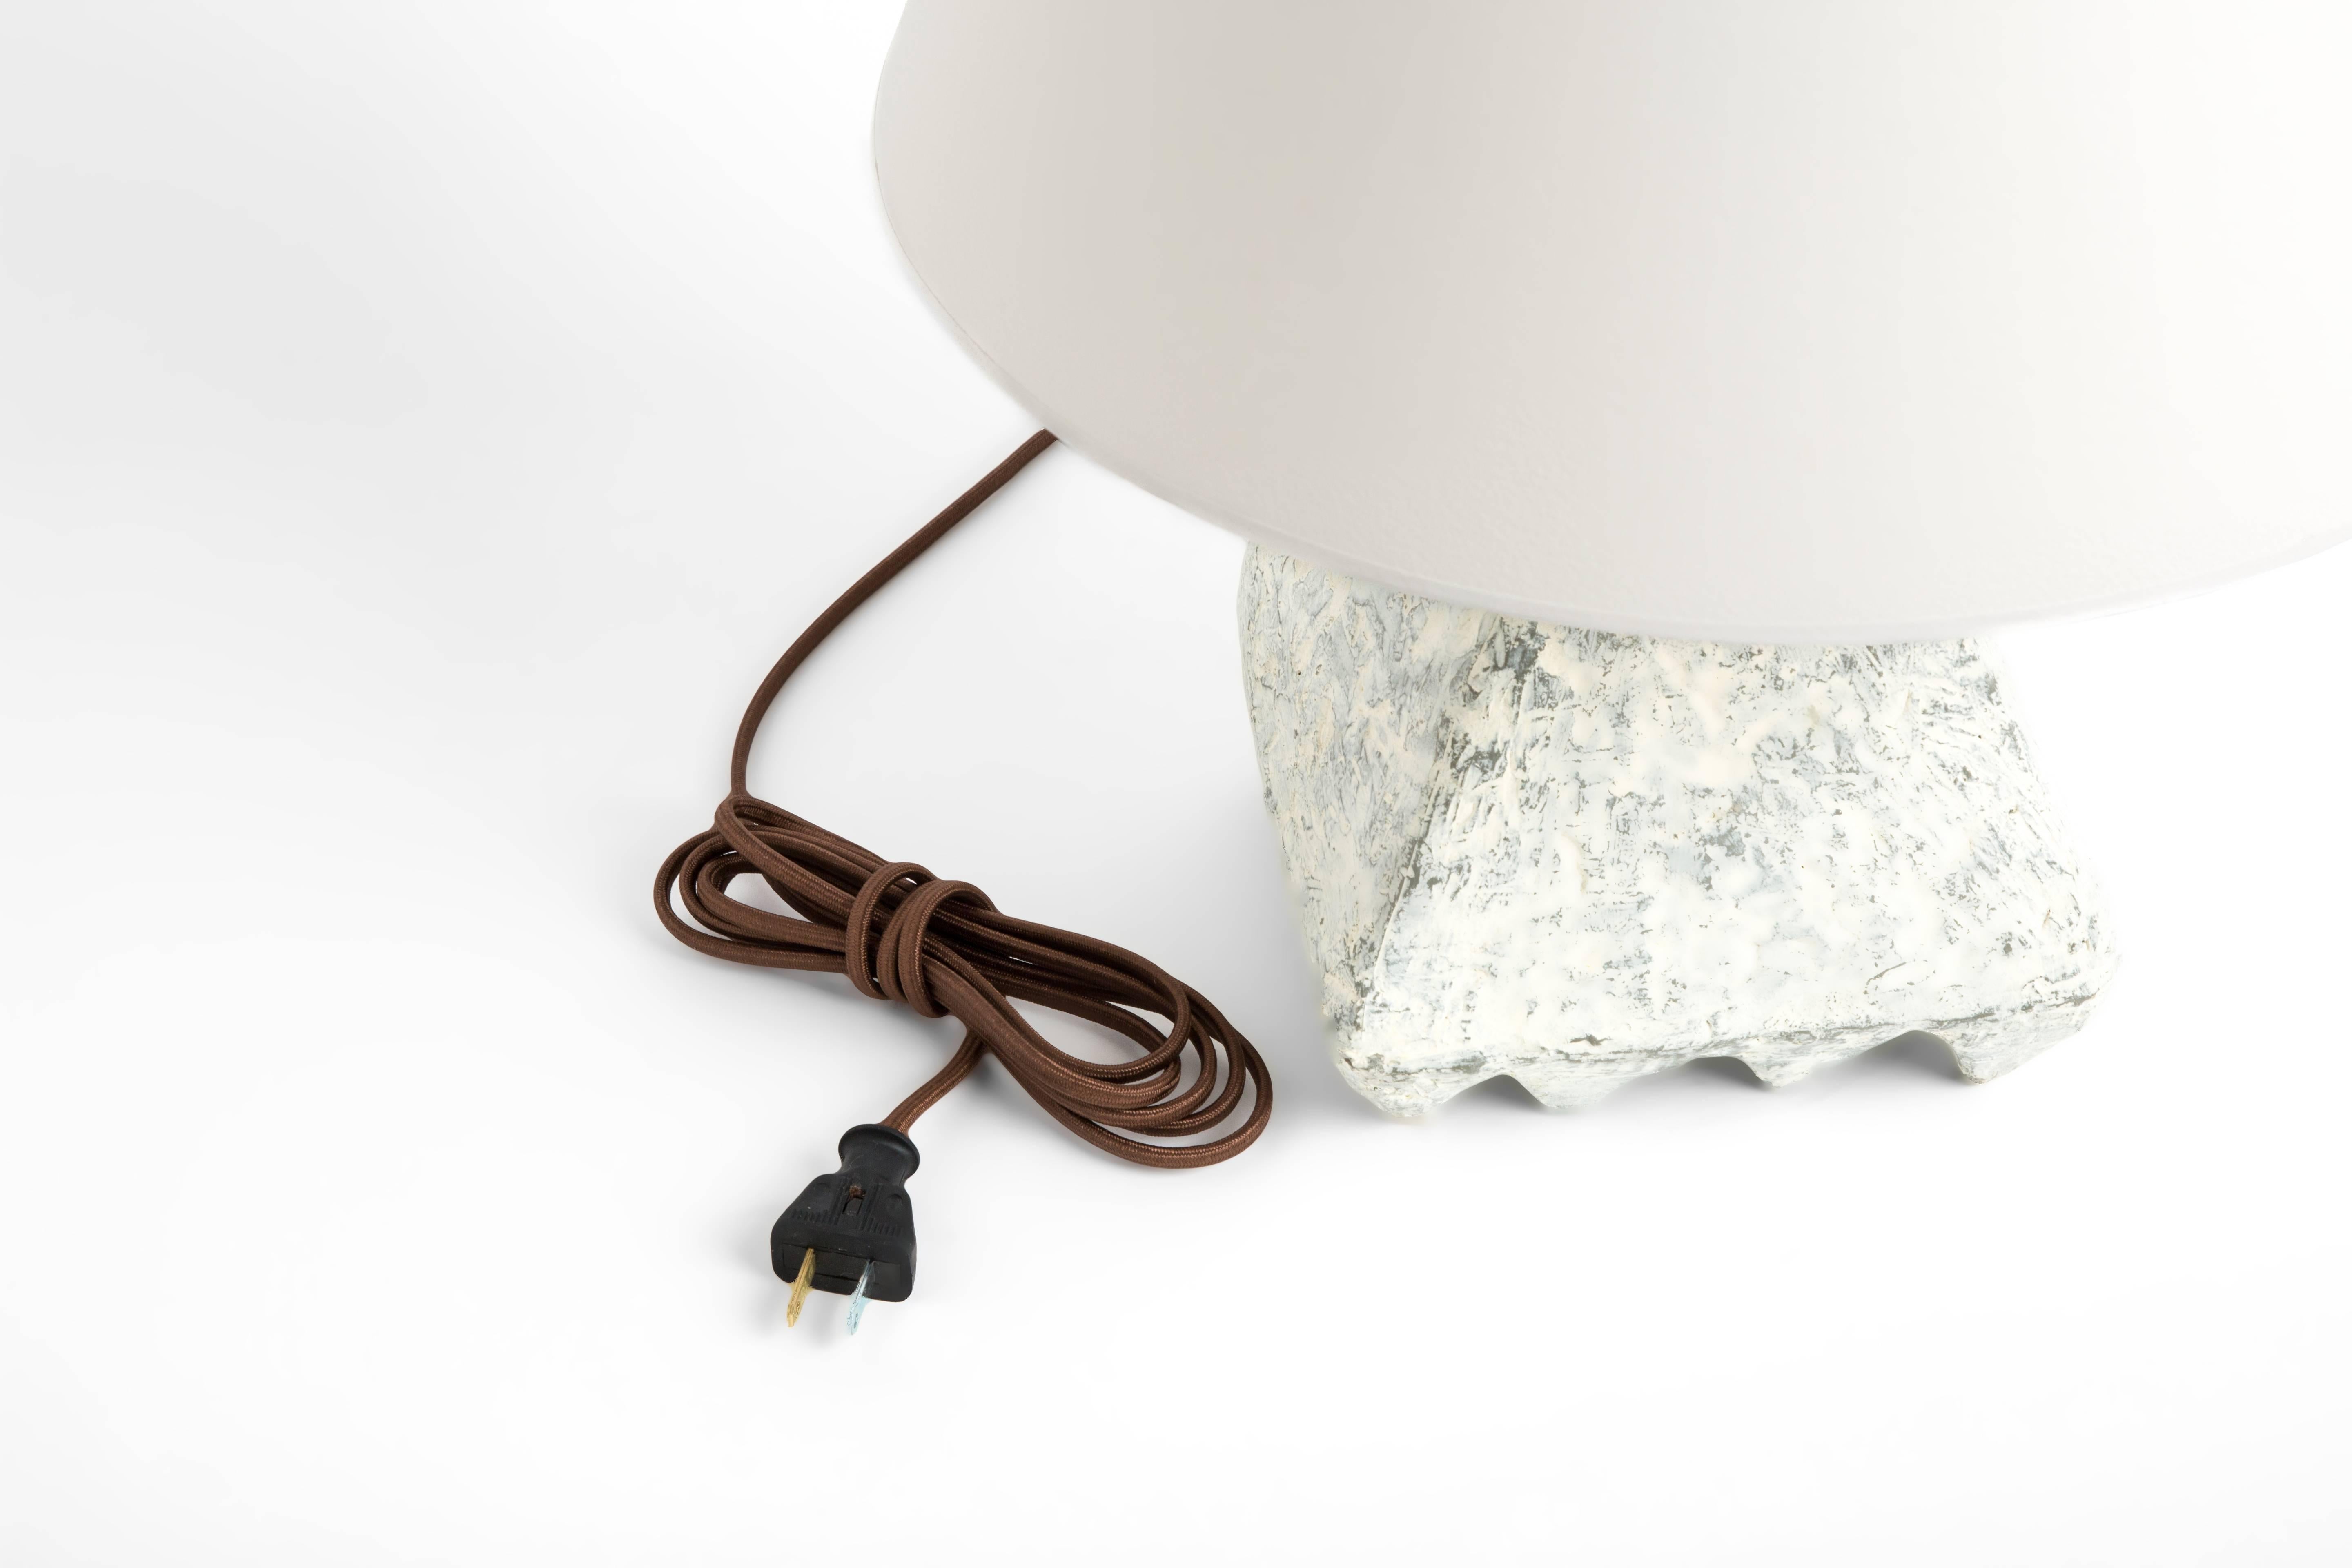 This lamp is 1 of 5 resin lamps of Dolatowski's cast lamp series. This resin lamp is organic, modeled and textured in form. 

Wired to US standards. Shade not included.

Influenced by his travels in Asia and the Middle East, Dolatowski’s designs